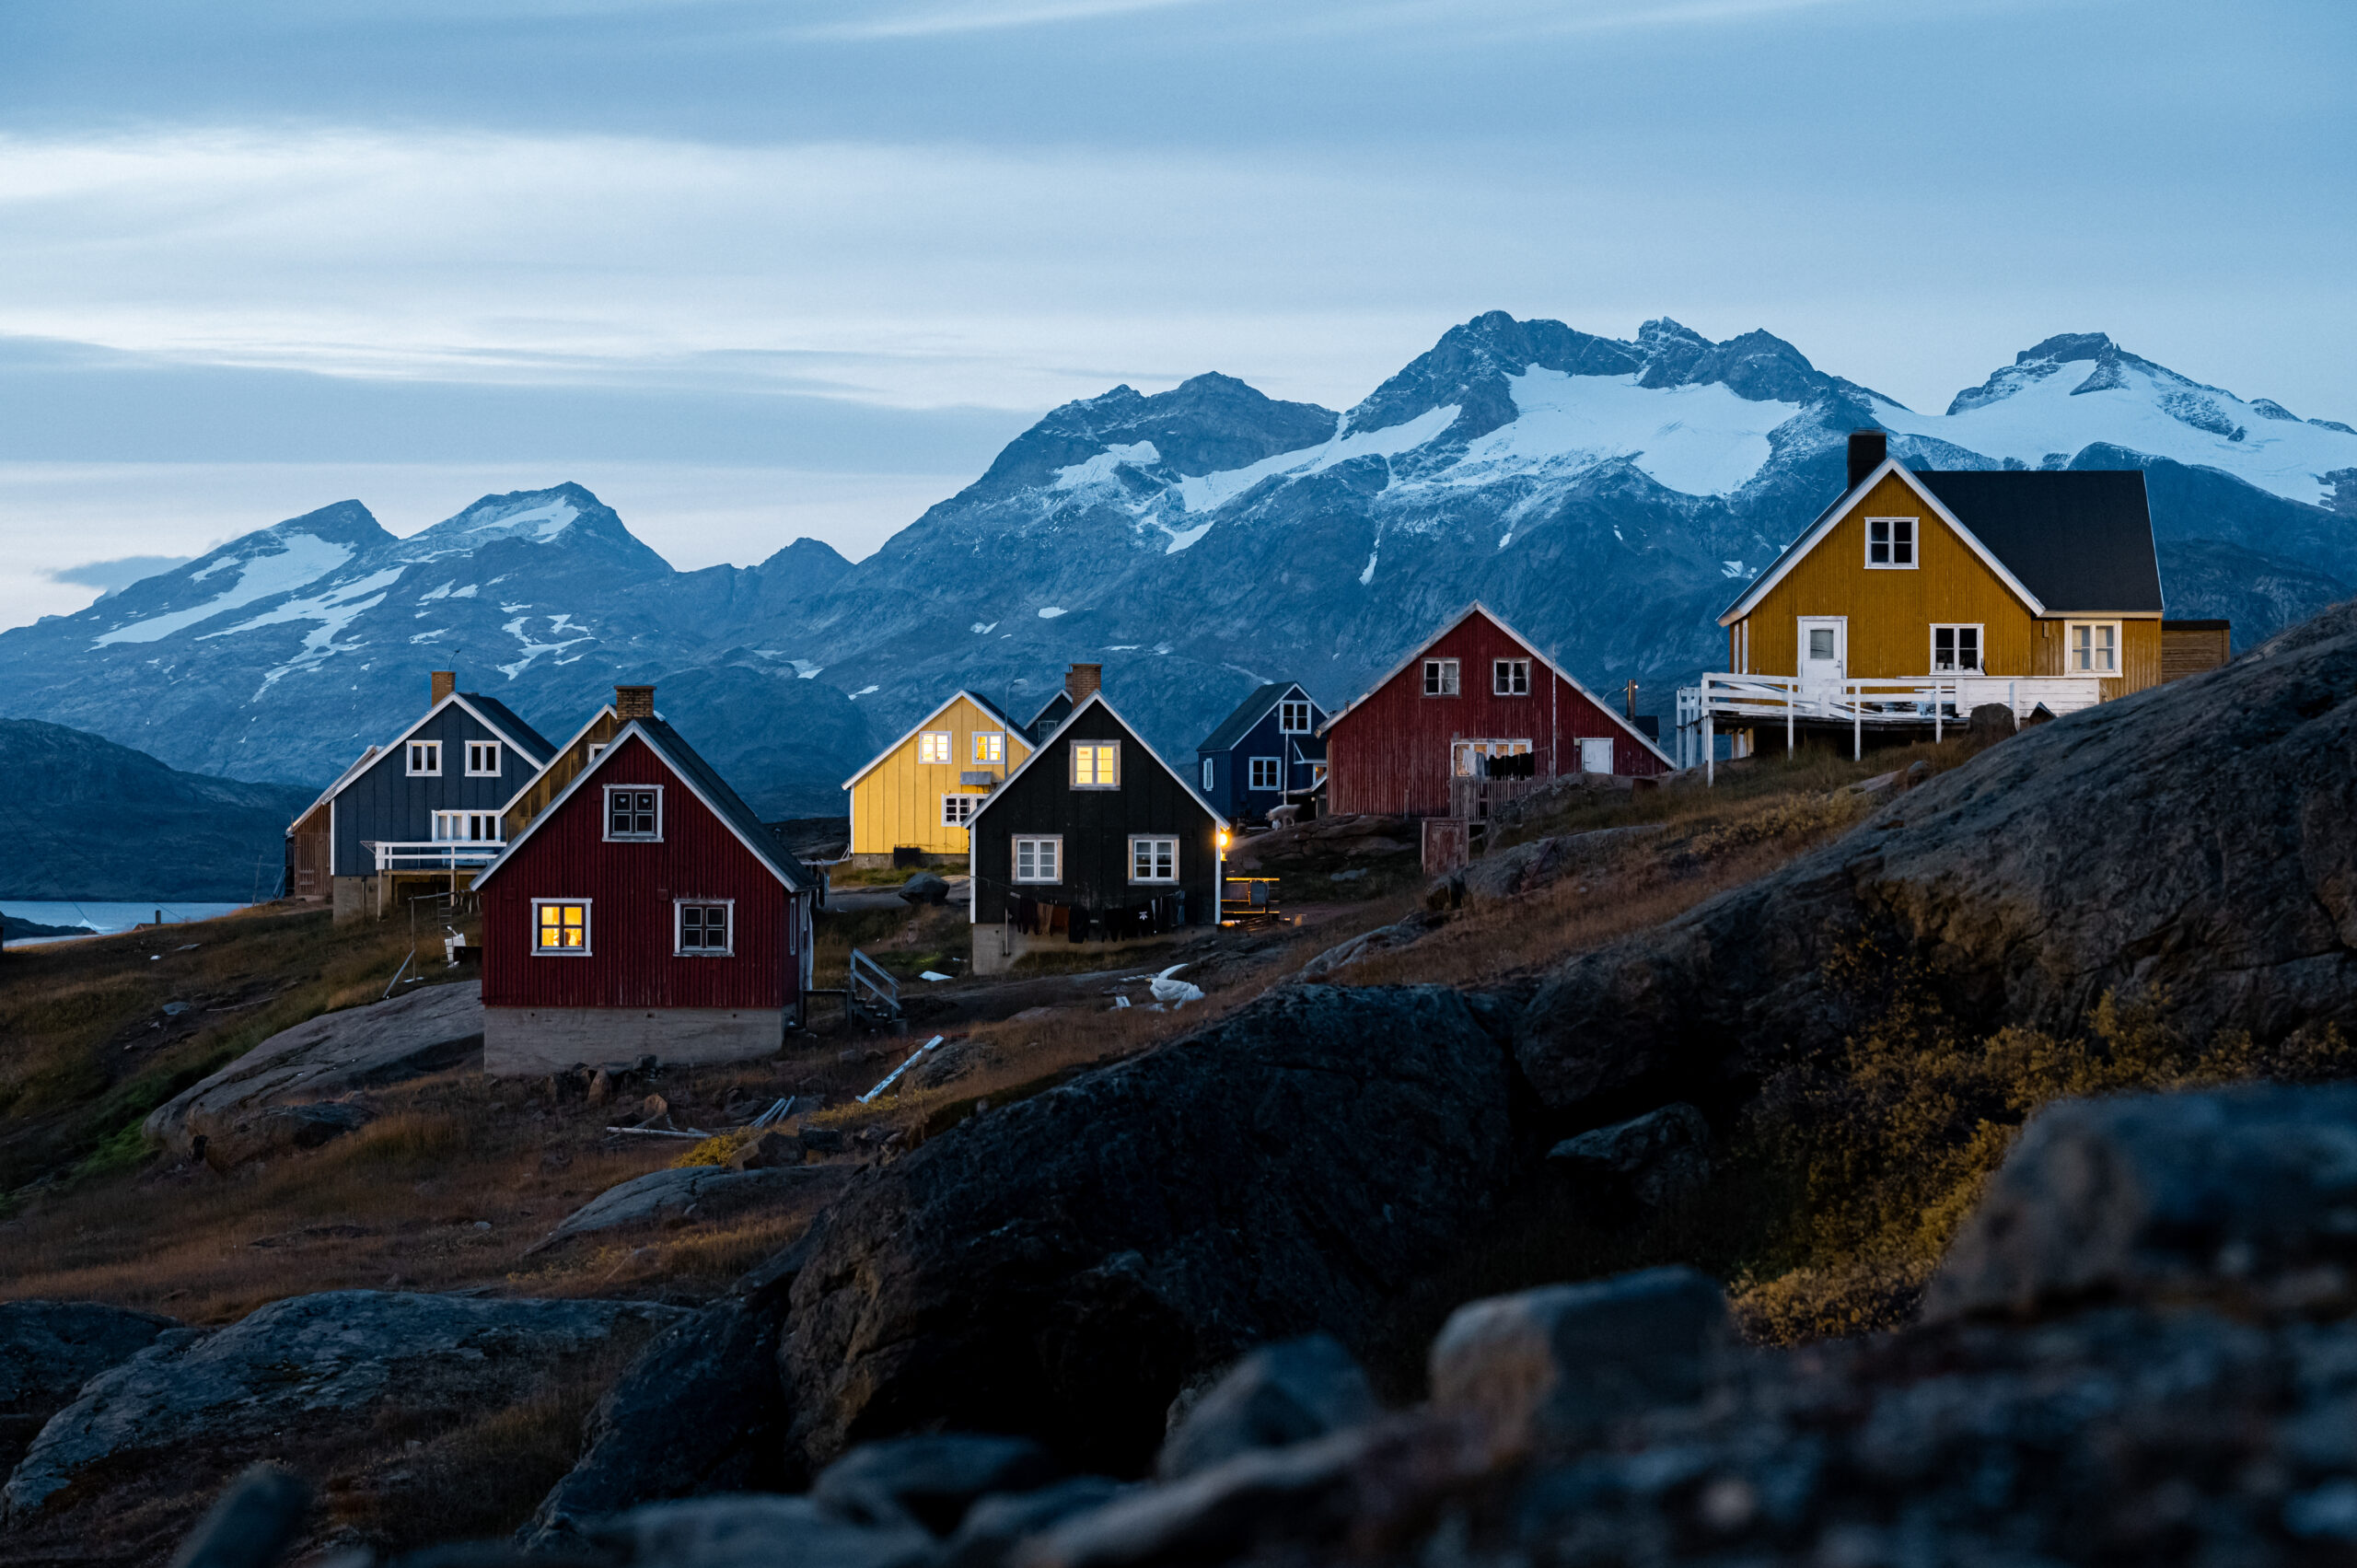 Evening fall view of Tasiilaq. Photo by Chris Koenig - Visit East Greenland